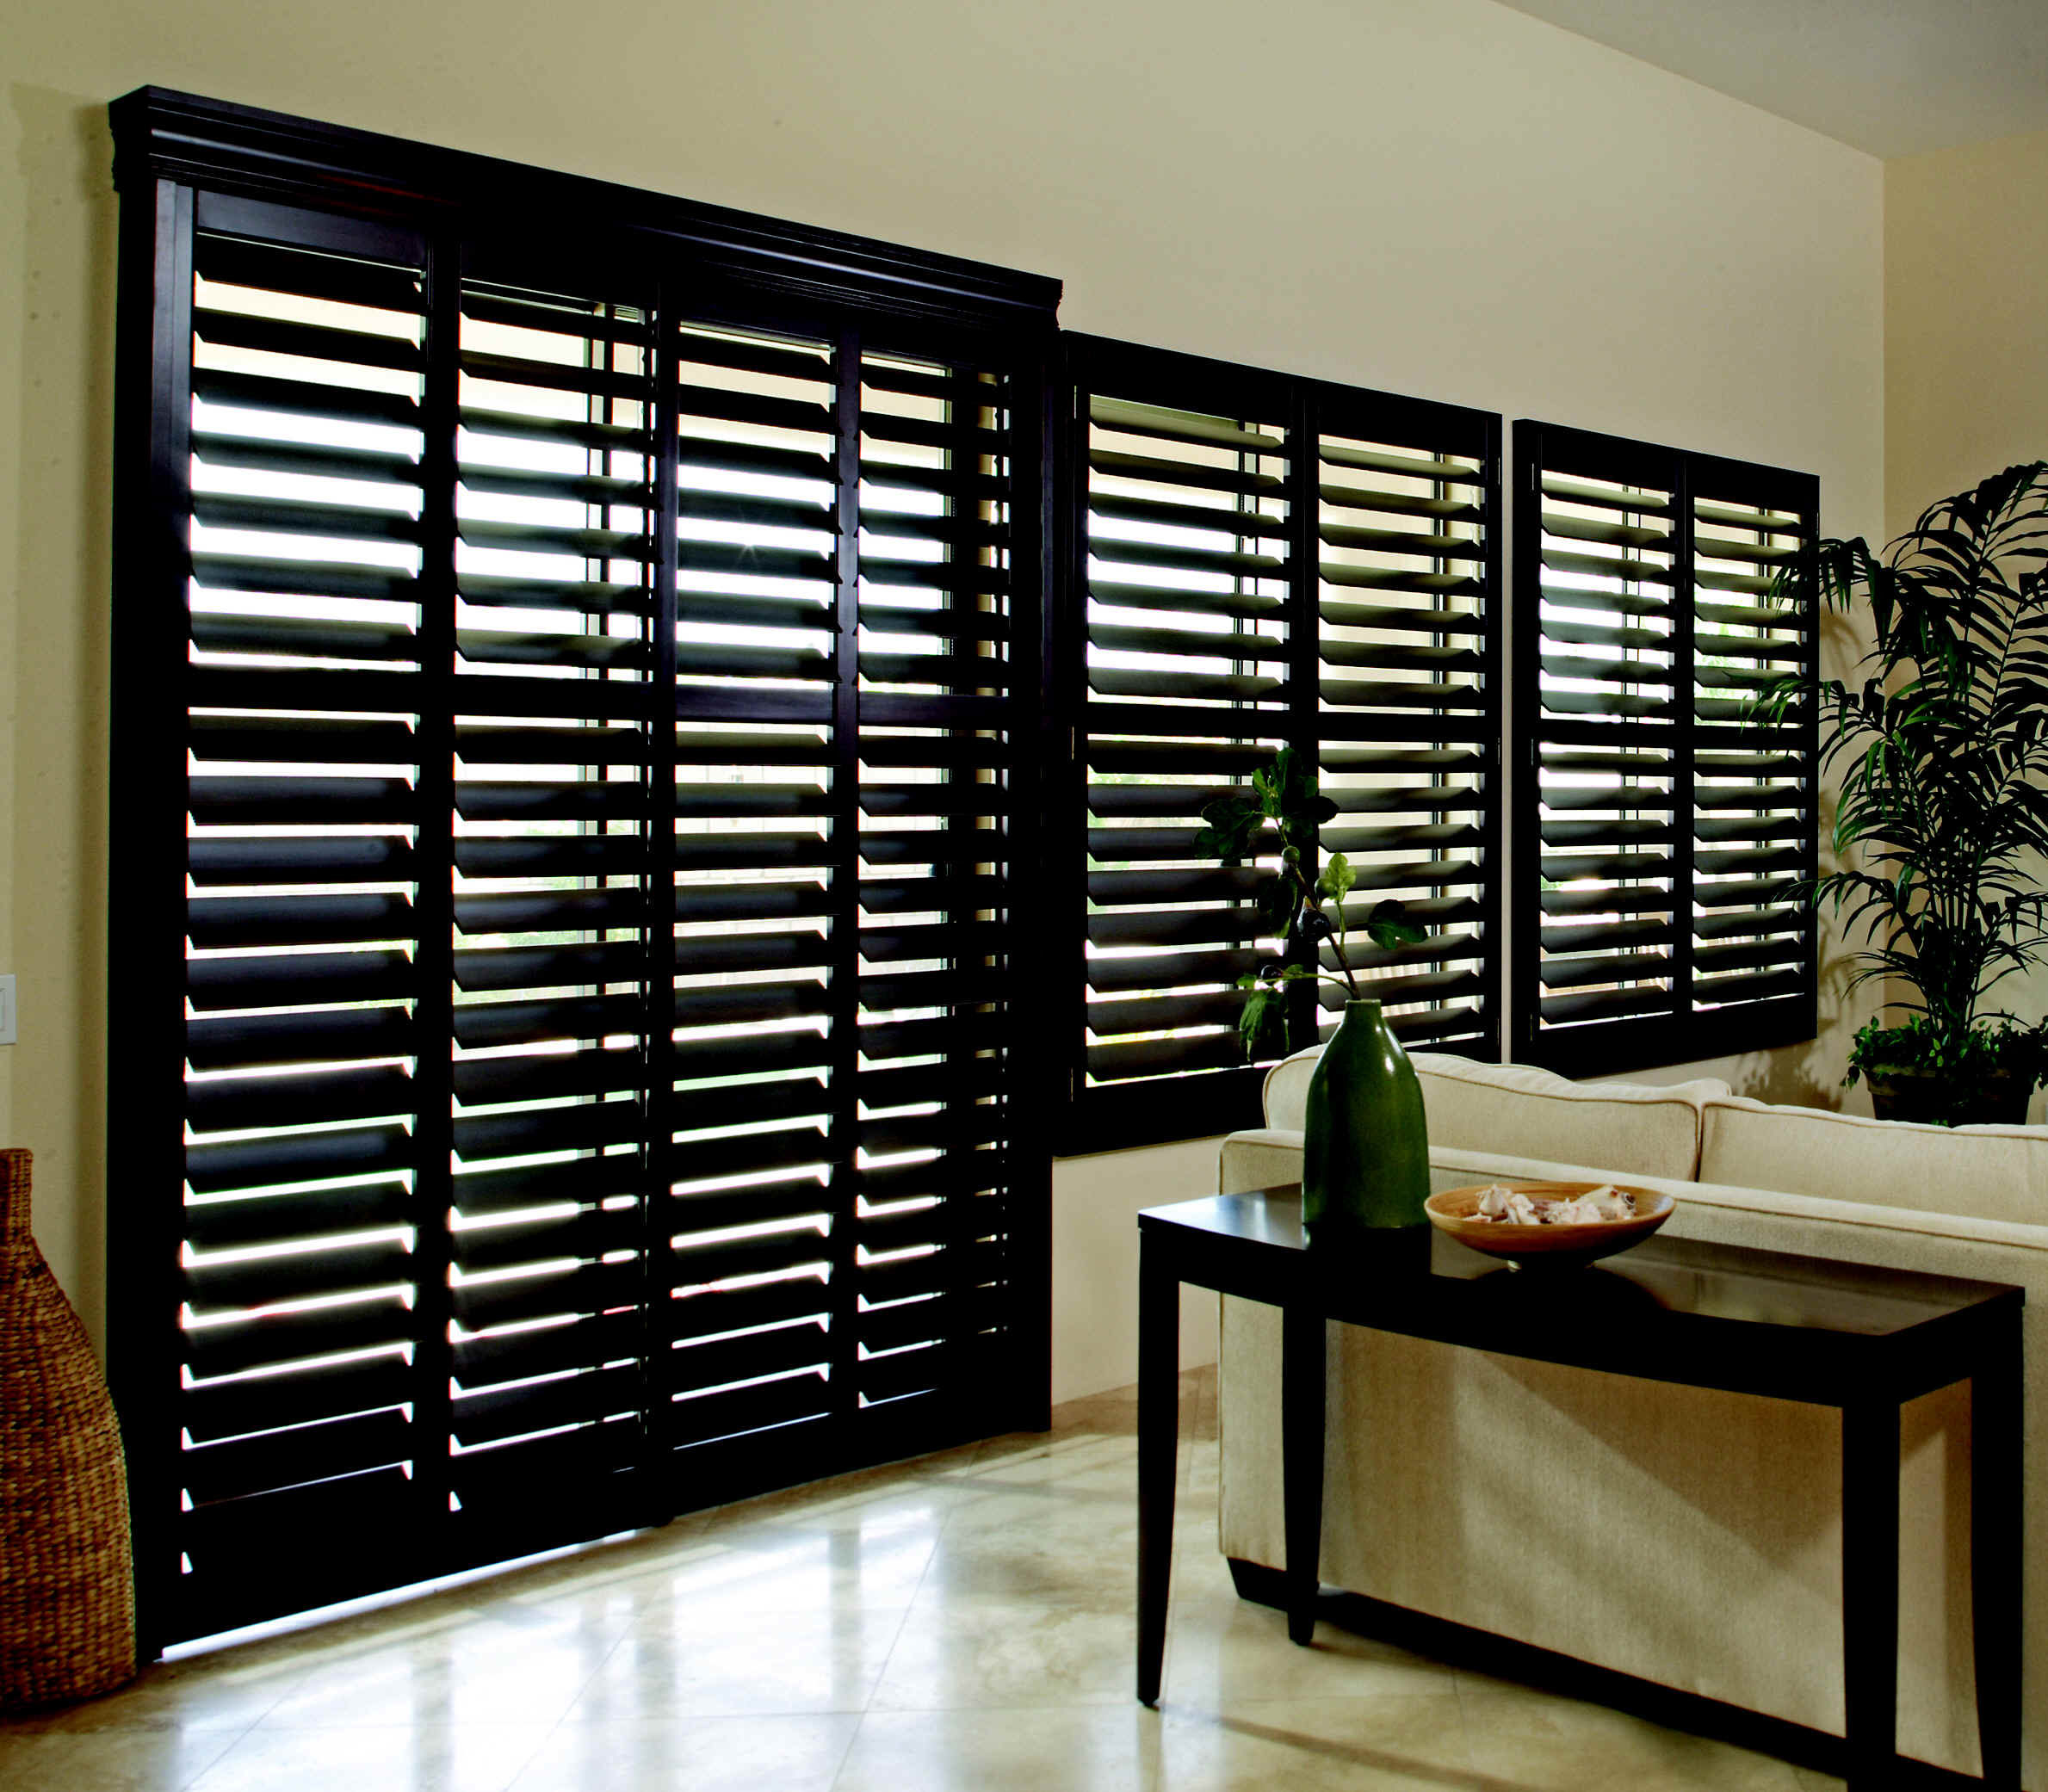 Clearview Shutters For Sale At Low Prices in Jefferson